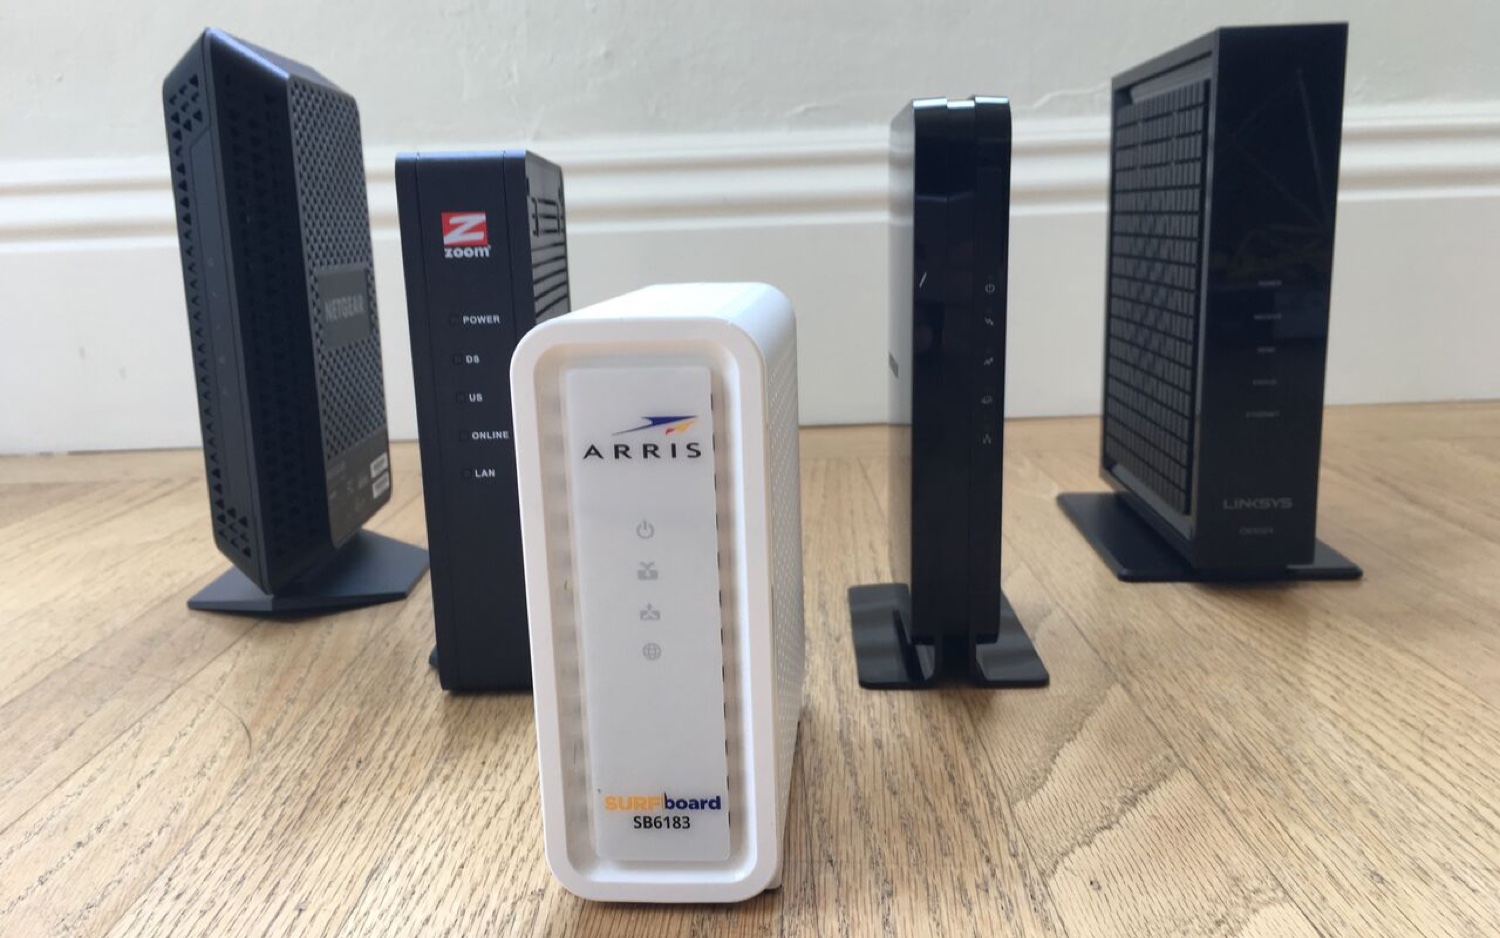 How choose right cable modem | Tom's Guide